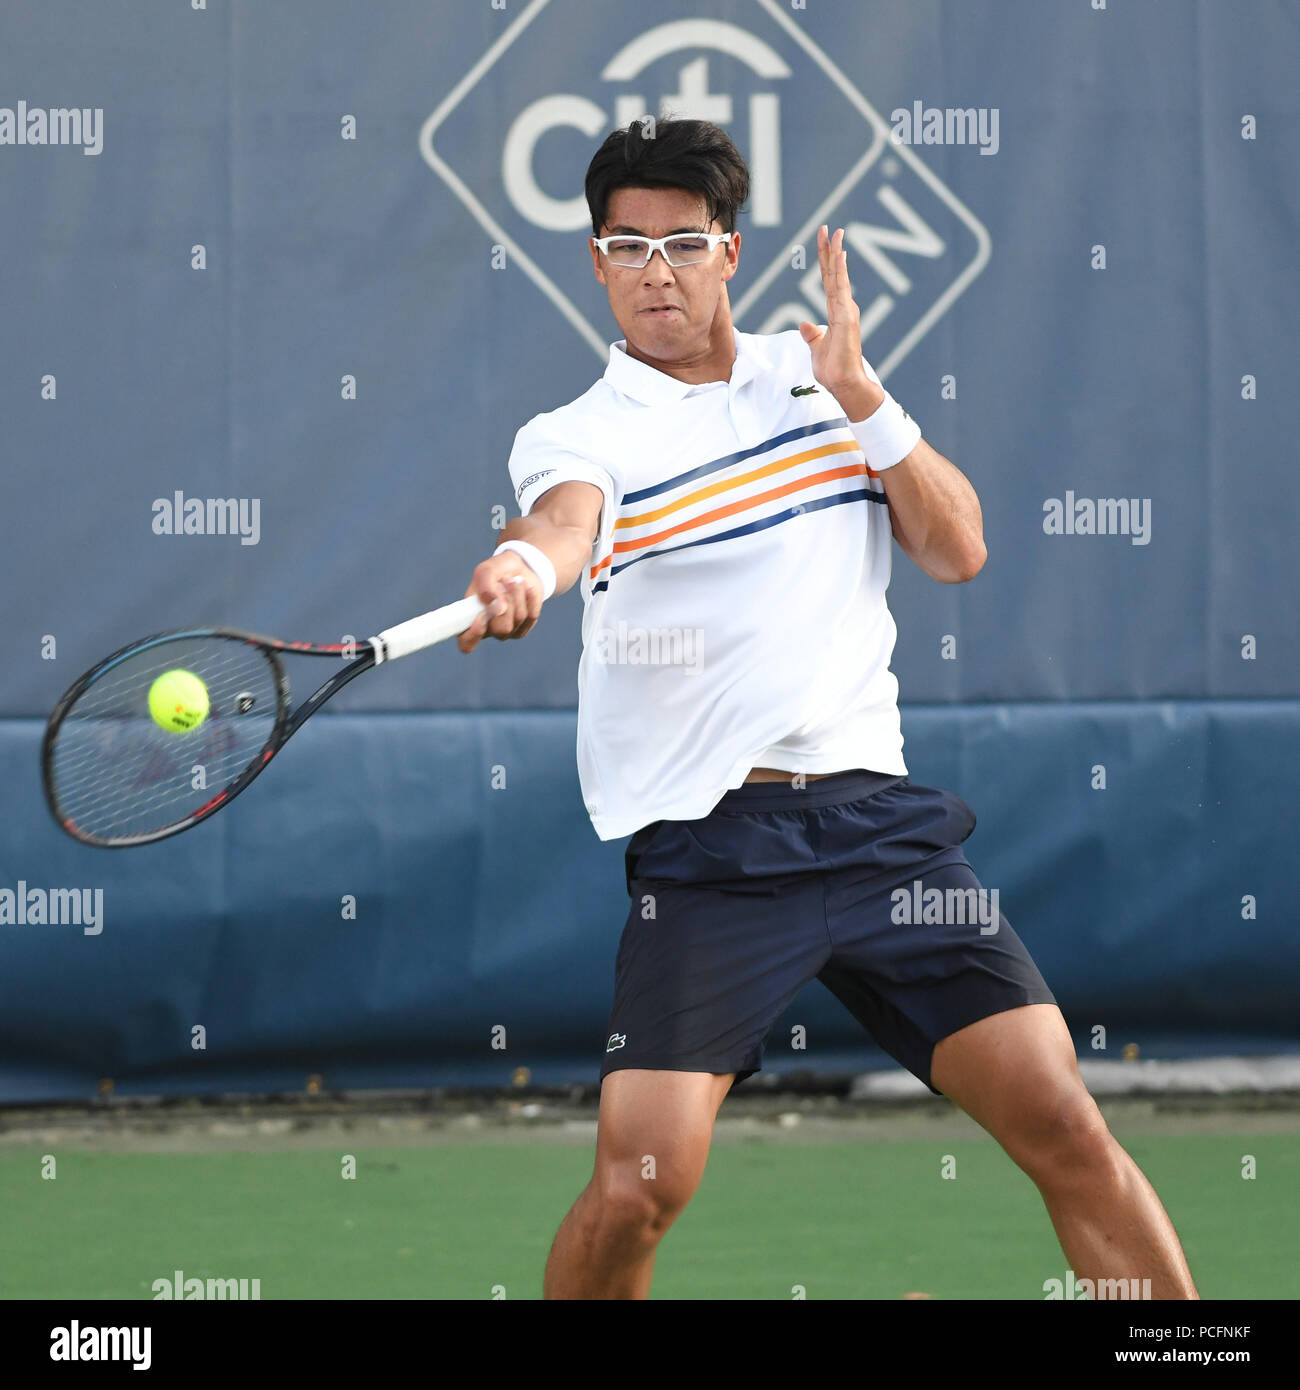 Washington, D.C, USA. 1st Aug, 2018. HYEON CHUNG hits a forehand during his 2nd round match at the Citi Open at the Rock Creek Park Tennis Center in Washington, DC Credit: Kyle Gustafson/ZUMA Wire/Alamy Live News Stock Photo